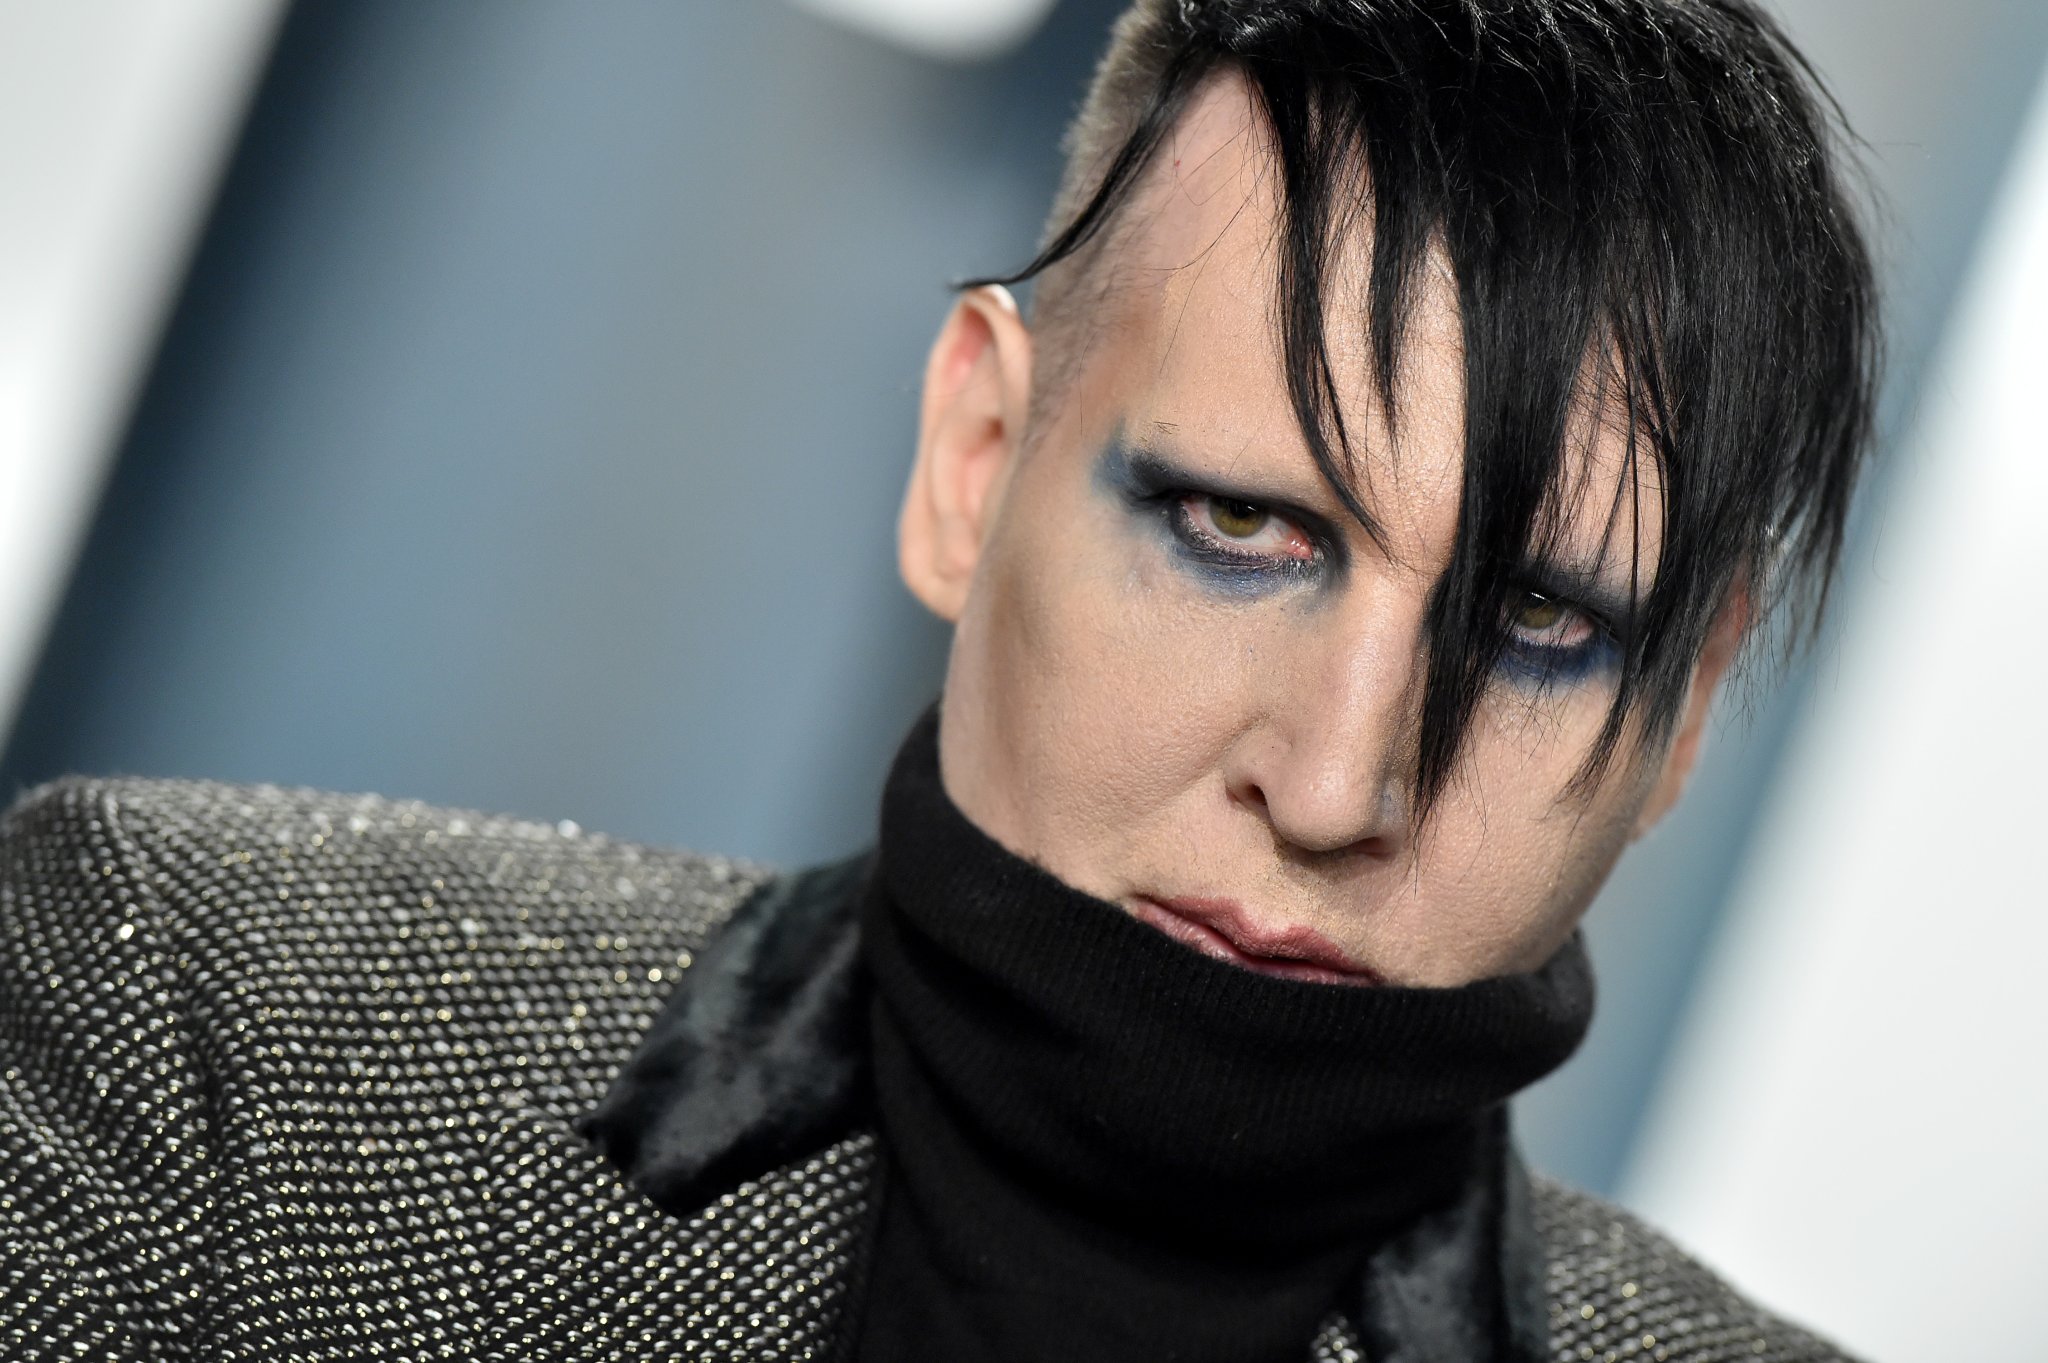 Marilyn Manson Dropped by Loma Vista Recordings Following Abuse Accusations